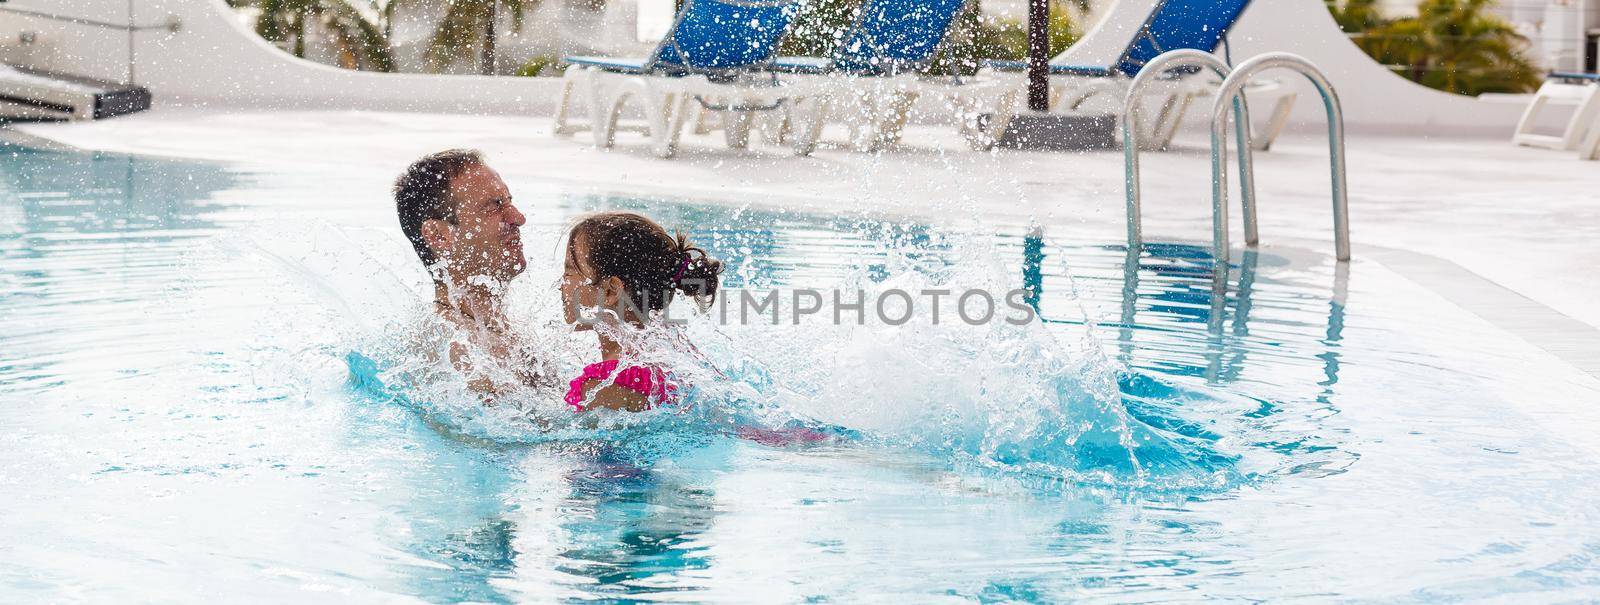 Father playing with his daughter in swimming pool by Andelov13